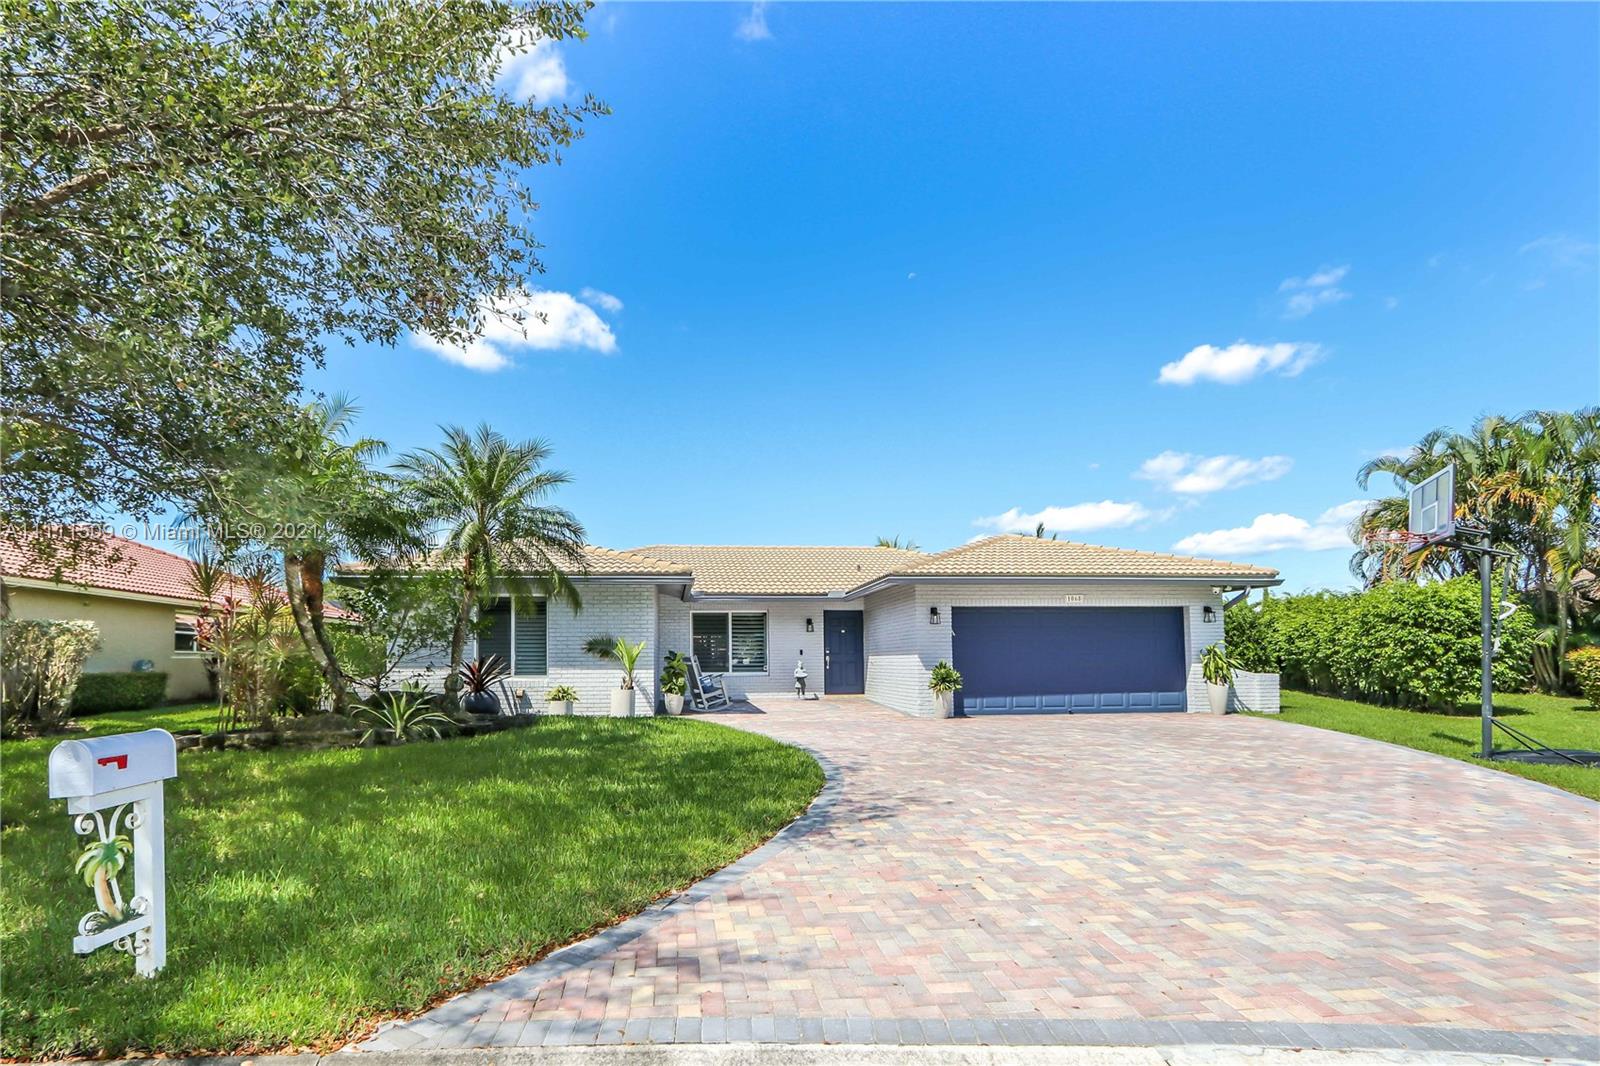 1068 NW 108th Ln Coral Springs FL 33071